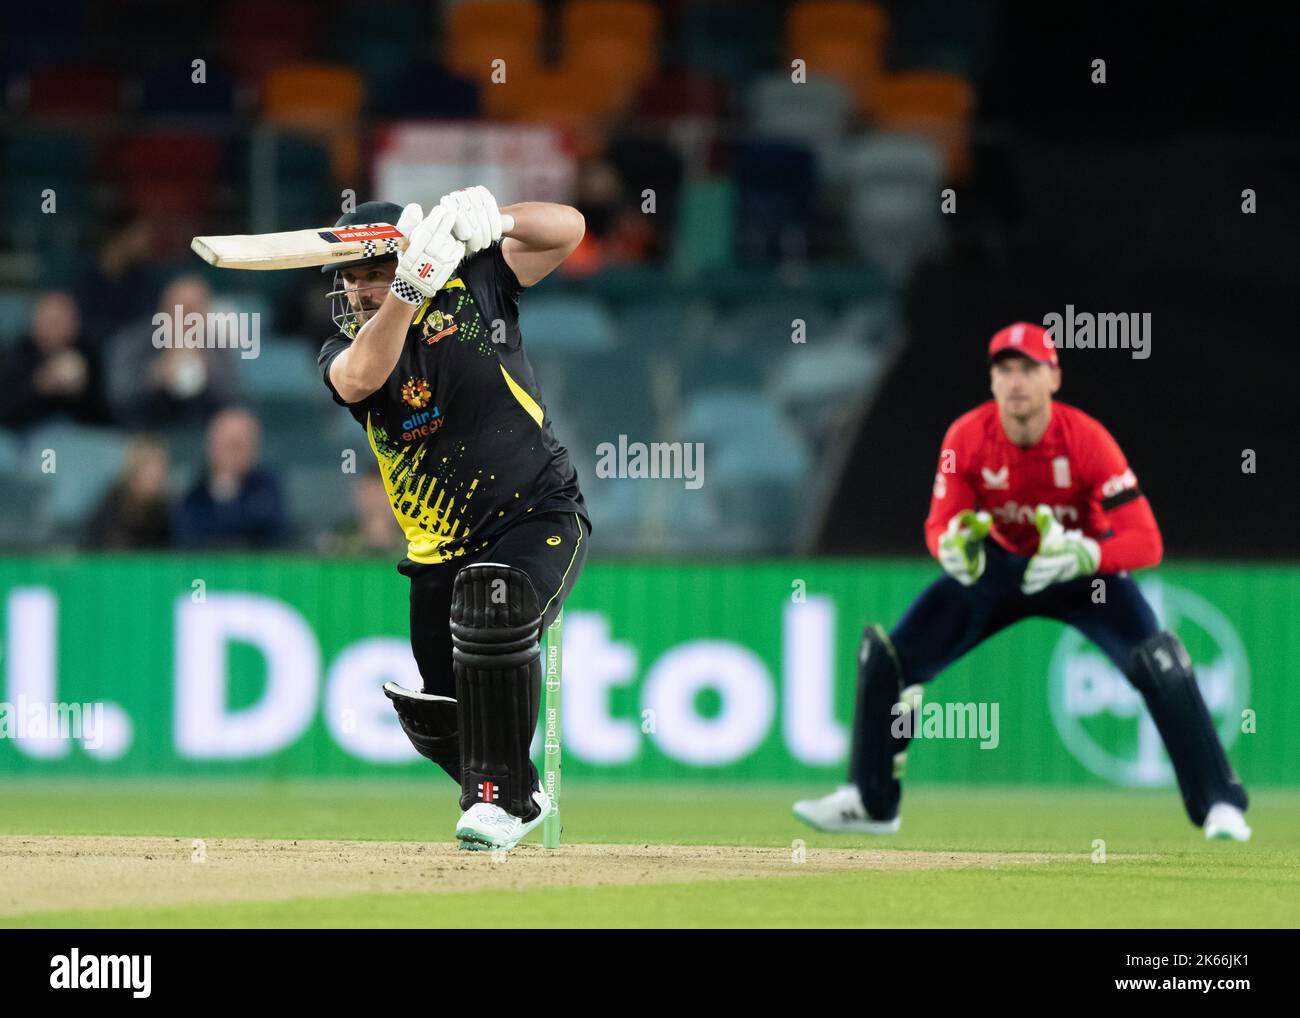 Canberra, Australia. 12th Oct, 2022. Aaron Finch (C) of Australia bats during game two of the T20 International series between Australia and England at Manuka Oval on October 12, 2022 in Canberra, Australia. IMAGE RESTRICTED TO EDITORIAL USE - STRICTLY NO COMMERCIAL USE Credit: Izhar Ahmed Khan/Alamy Live News/Alamy Live News Stock Photo